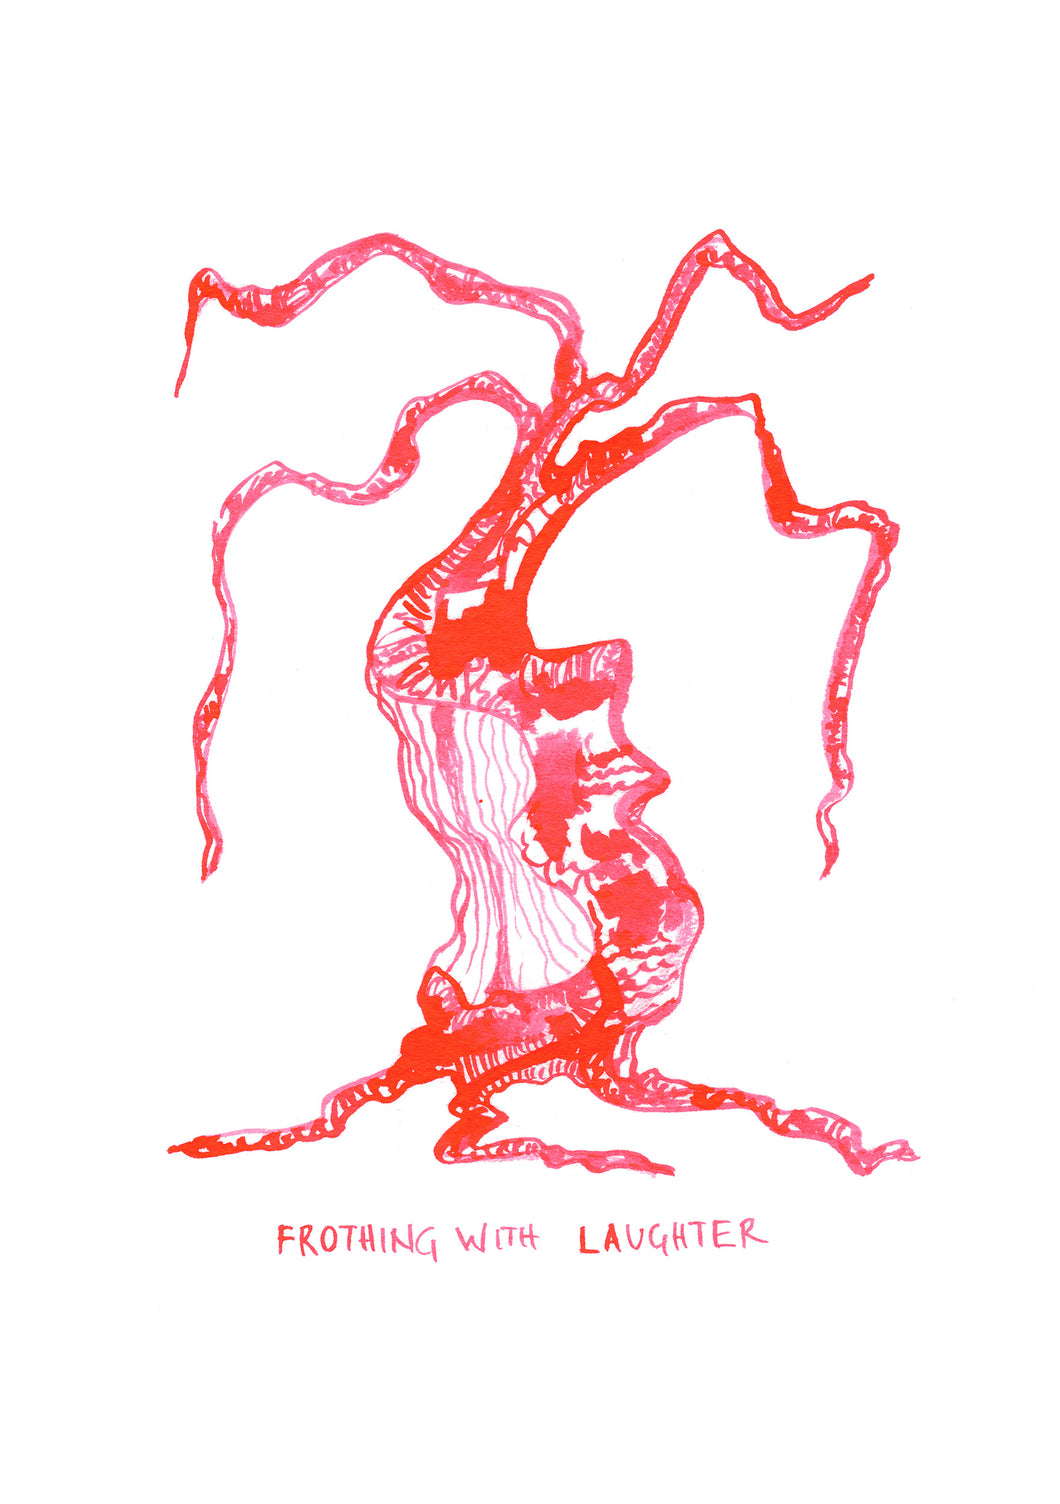 19. Frothing with laughter